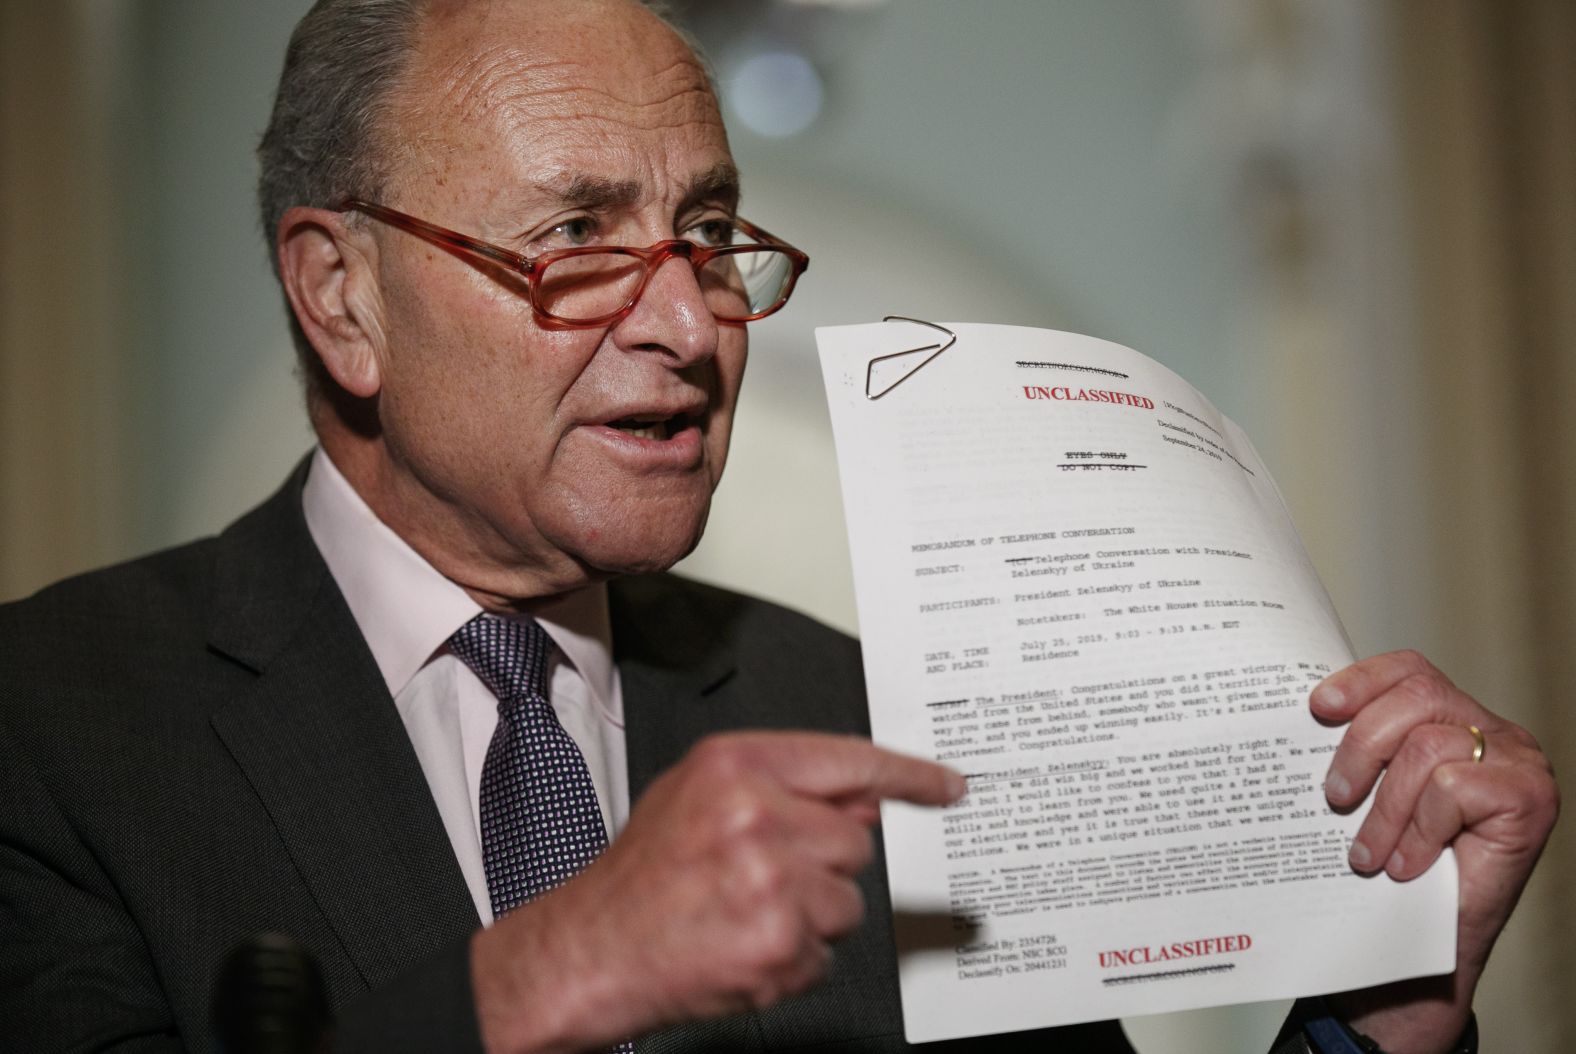 Senate Minority Leader Chuck Schumer holds a copy of the phone-call transcript that was released by the White House on September 25. <a href="index.php?page=&url=https%3A%2F%2Fwww.cnn.com%2Fpolitics%2Flive-news%2Ftrump-impeachment-inquiry-09-25-2019%2Fh_be0392c4d6e5bc0069690ae4c794ad63" target="_blank">The Democratic leader said</a> the transcript "validates the wisdom" of Pelosi to announce an official impeachment inquiry.